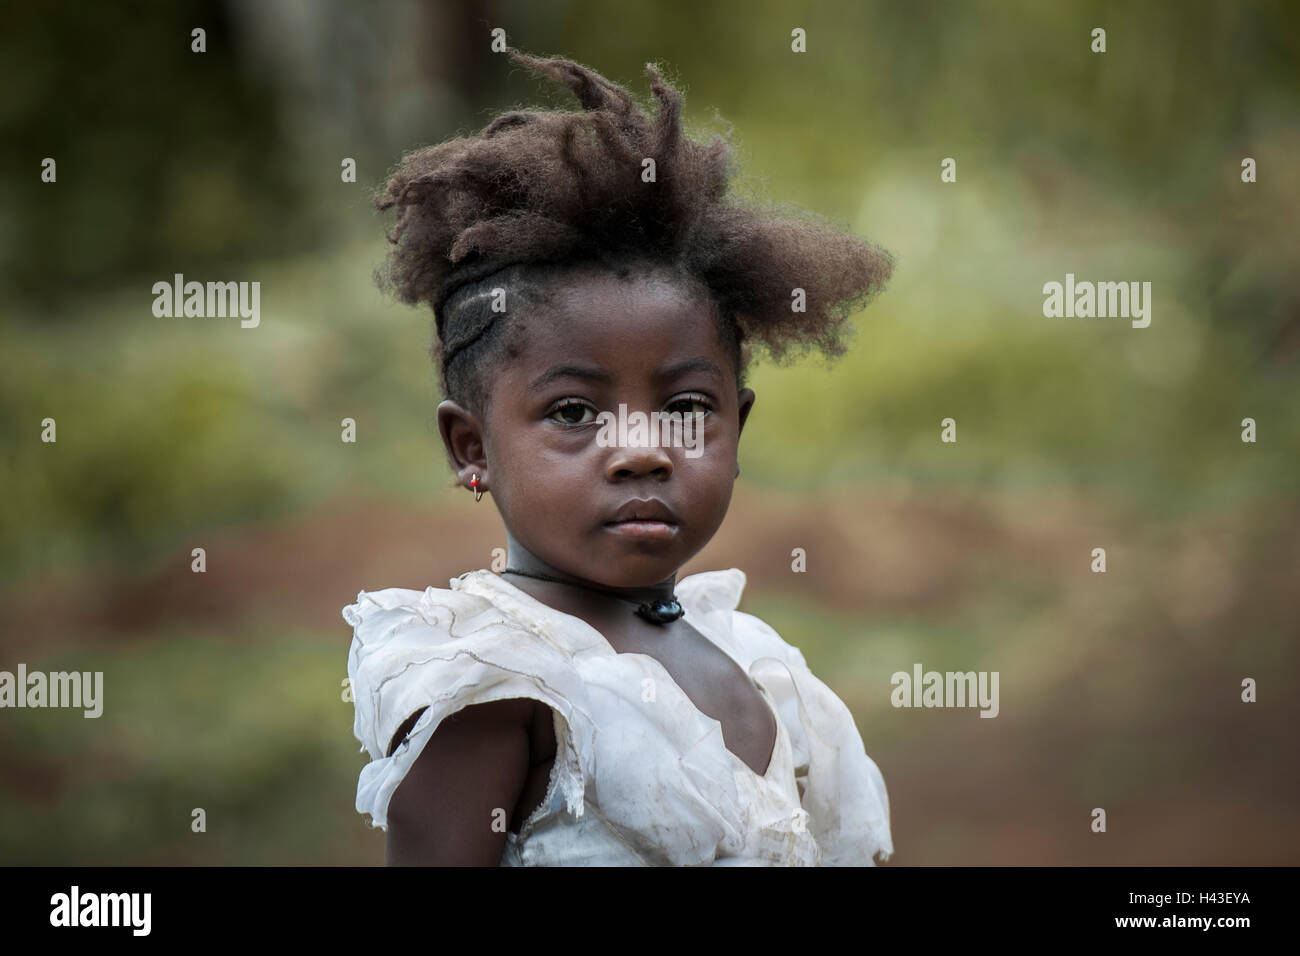 Girl with unique hairstyle, street scene, Fundong, North-West Region, Cameroon Stock Photo